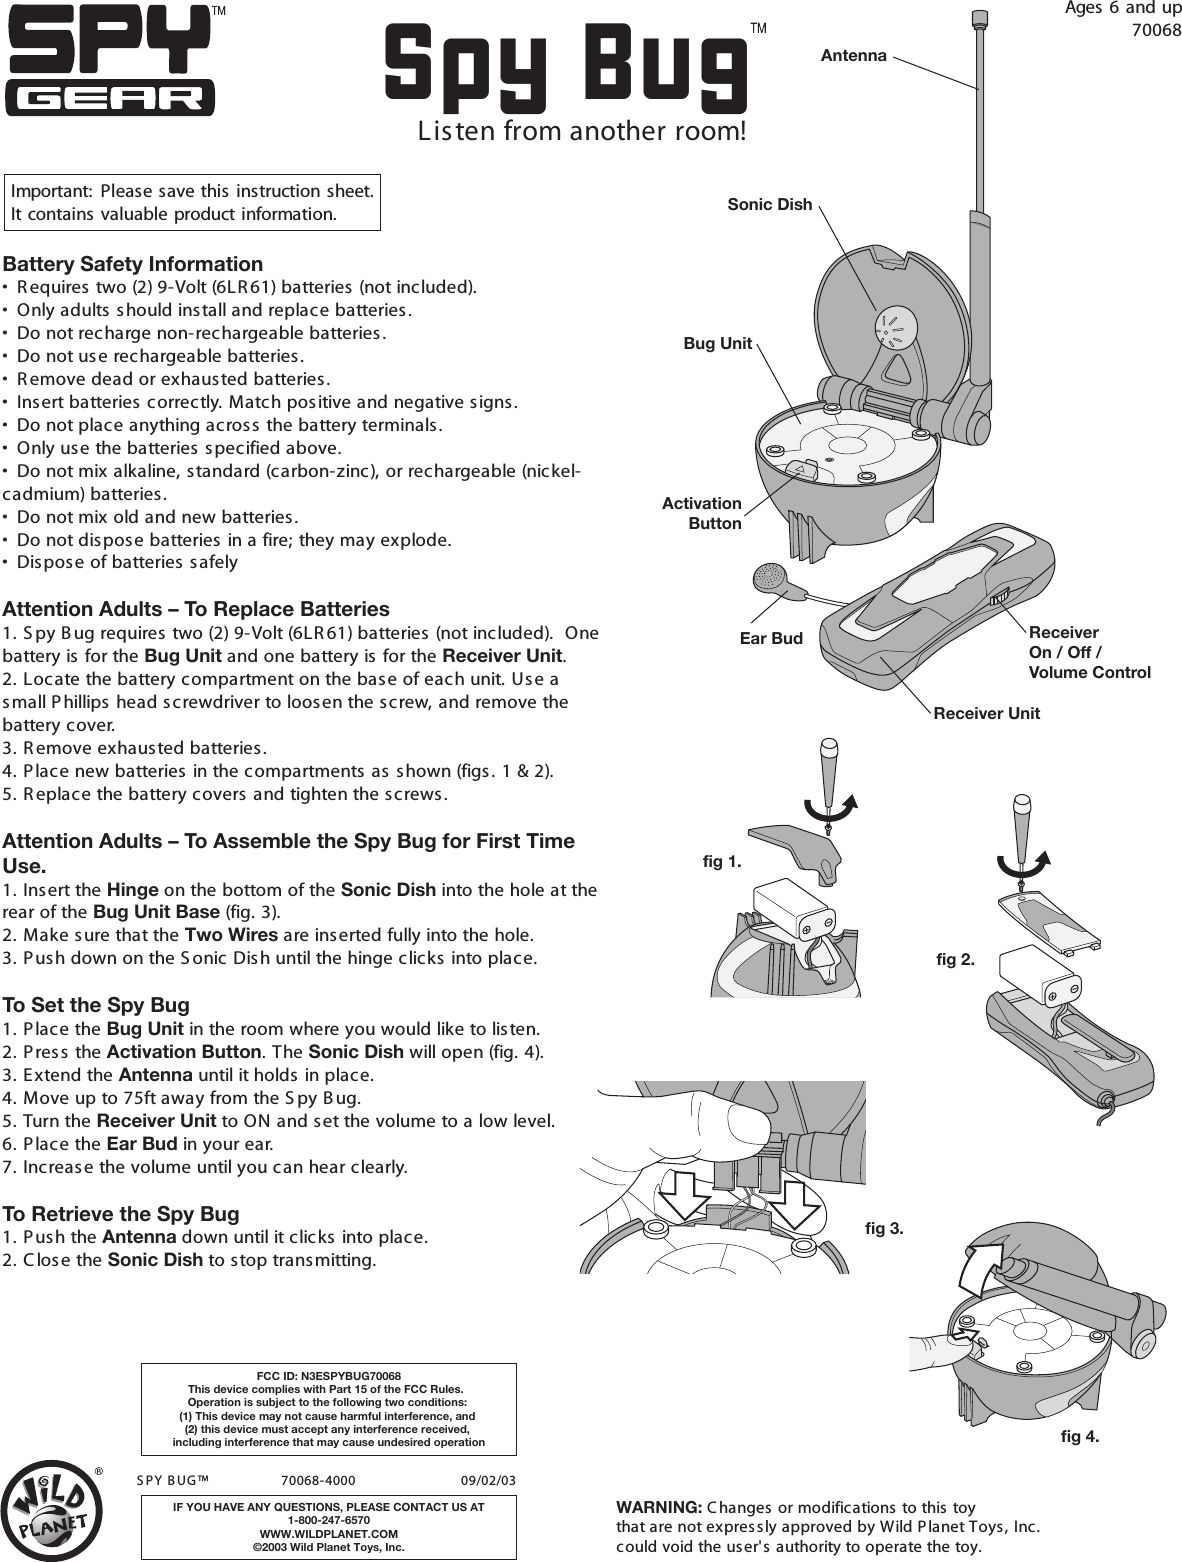 Spy BugAges  6  and  up70068Important: Please  save  this  instruction sheet. It  contains  valuable  product information.                     S PY B UG ™                   70068-4000                           09/02/03 IF YOU HAVE ANY QUESTIONS, PLEASE CONTACT US AT1-800-247-6570WWW.WILDPLANET.COM©2003 Wild Planet Toys, Inc.FCC ID: N3ESPYBUG70068This device complies with Part 15 of the FCC Rules.  Operation is subject to the following two conditions: (1) This device may not cause harmful interference, and (2) this device must accept any interference received, including interference that may cause undesired operationLis ten from another room!fig 1.fig 3.fig 4.Receiver Unit ReceiverOn / Off / Volume ControlEar BudSonic DishBug UnitAntennaActivationButtonBattery Safety Information•  R equires two (2) 9-Volt (6LR 61) batteries (not included).•  Only adults should install and replace batteries .•  Do not recharge non-rechargeable batteries .•  Do not use rechargeable batteries.•  R emove dead or exhausted batteries .•  Insert batteries  correctly. Match pos itive and negative signs.•  Do not place anything across  the battery terminals.•  Only use the batteries specified above.•  Do not mix alkaline, standard (carbon-zinc), or rechargeable (nickel-cadmium) batteries .•  Do not mix old and new batteries .•  Do not dispos e batteries in a fire; they may explode.•  Dispos e of batteries  s afelyAttention Adults – To Replace Batteries1. S py B ug requires  two (2) 9-Volt (6LR 61) batteries (not included).  One battery is for the Bug Unit and one battery is for the Receiver Unit.2. Locate the battery compartment on the base of each unit. Us e a small Phillips head screwdriver to loosen the screw, and remove the battery cover. 3. R emove exhausted batteries.4. P lace new batteries in the compartments as  s hown (figs. 1 &amp; 2).5. R eplace the battery covers and tighten the s crews.Attention Adults – To Assemble the Spy Bug for First Time Use.1. Ins ert the Hinge on the bottom of the Sonic Dish into the hole at the rear of the Bug Unit Base (fig. 3).2. Make sure that the Two Wires are inserted fully into the hole.3. P ush down on the S onic Dish until the hinge clicks  into place.To Set the Spy Bug1. P lace the Bug Unit in the room where you would like to listen.2. P res s the Activation Button. The Sonic Dish will open (fig. 4).3. E xtend the Antenna until it holds in place.4. Move up to 75ft away from the S py B ug.5. Turn the Receiver Unit to ON and set the volume to a low level.6. P lace the Ear Bud in your ear.7. Increas e the volume until you can hear clearly.To Retrieve the Spy Bug1. P ush the Antenna down until it clicks into place.2. C lose the Sonic Dish to stop trans mitting.fig 2.WARNING: C hanges or modifications to this toy that are not express ly approved by Wild P lanet Toys, Inc. could void the user&apos;s authority to operate the toy.